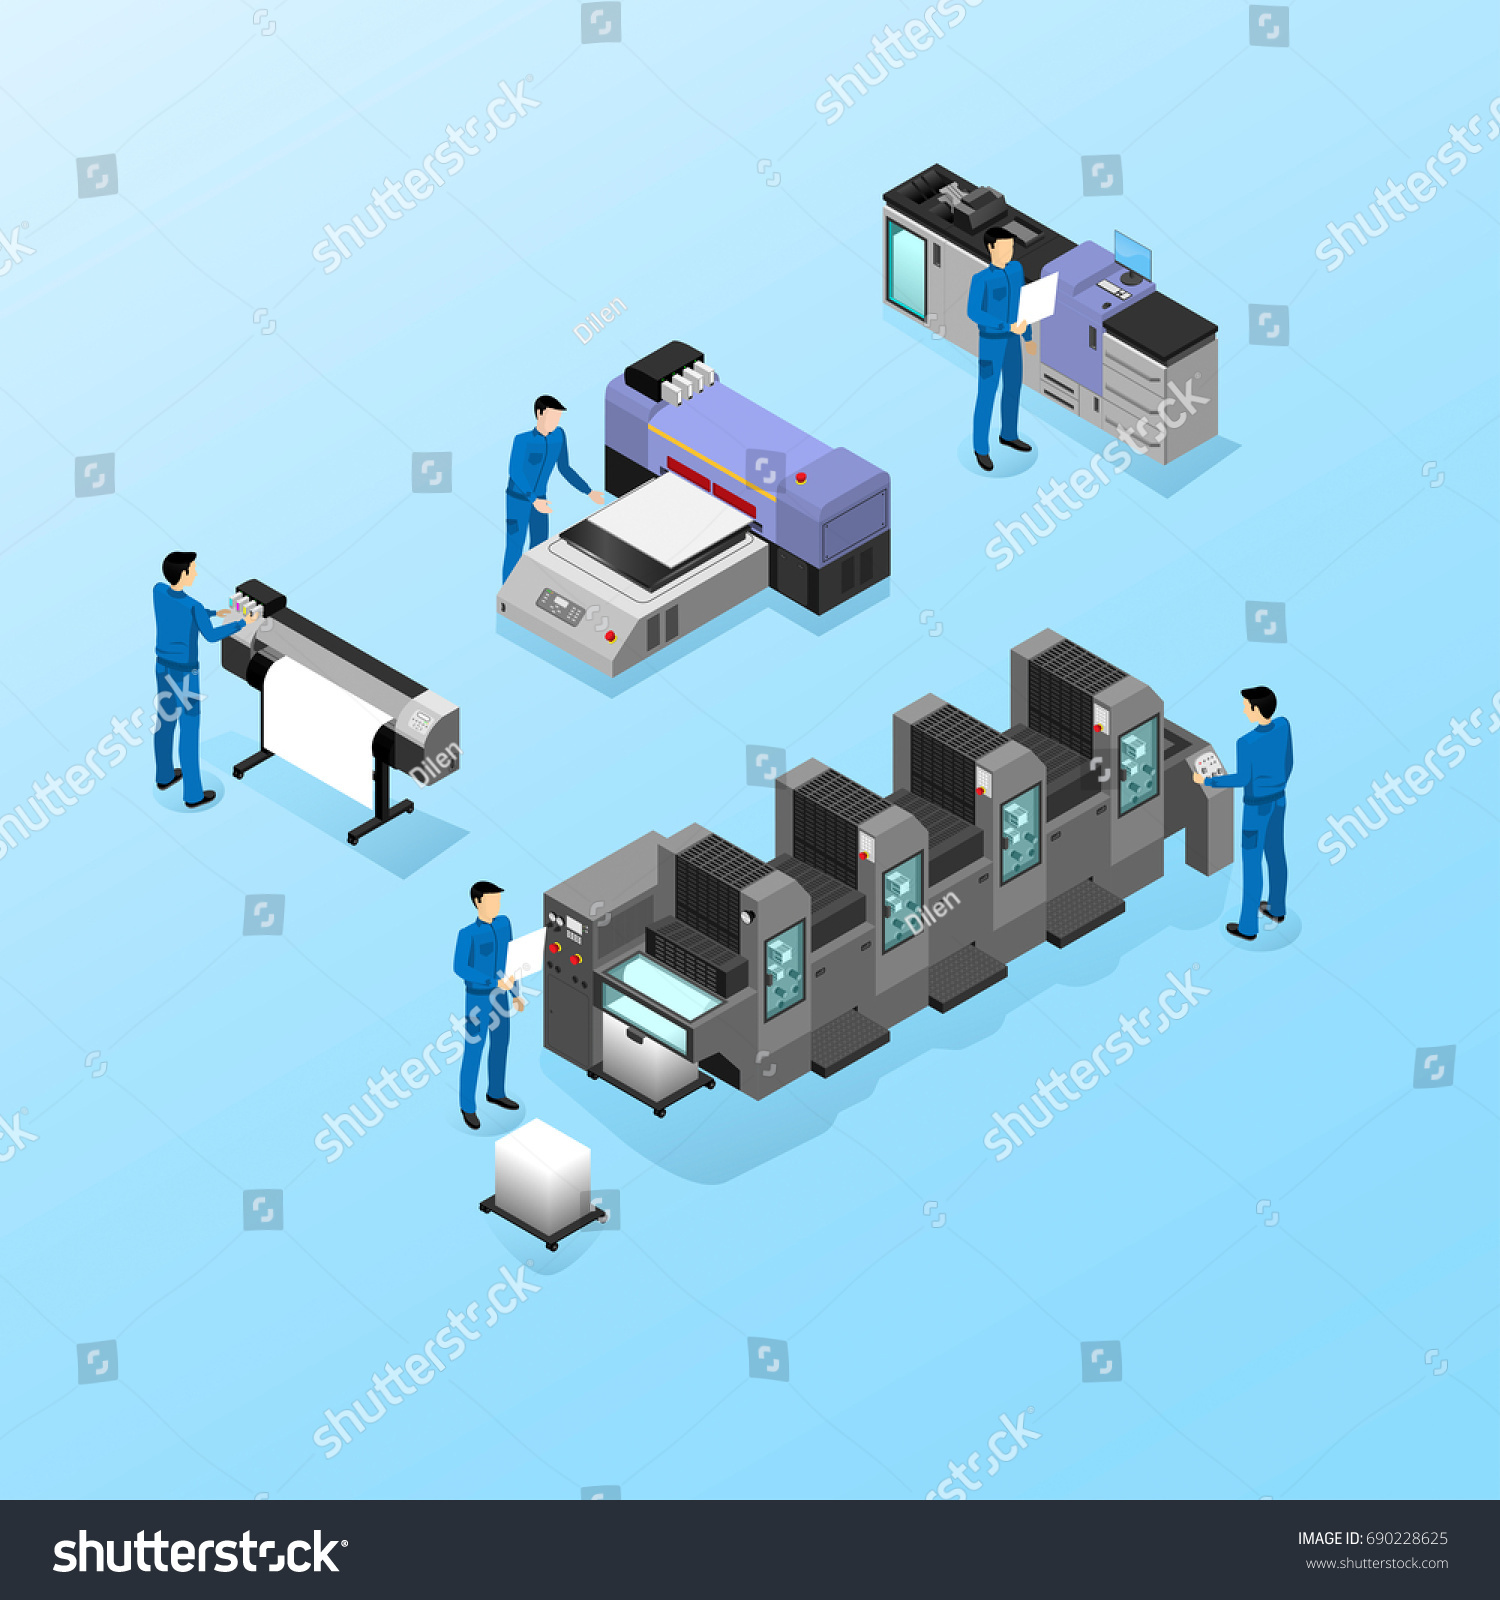 SVG of Professional equipment for various types of printing in the field of advertising, offset and digital as well as inkjet and ultraviolet printing, workers are servicing machines in production svg